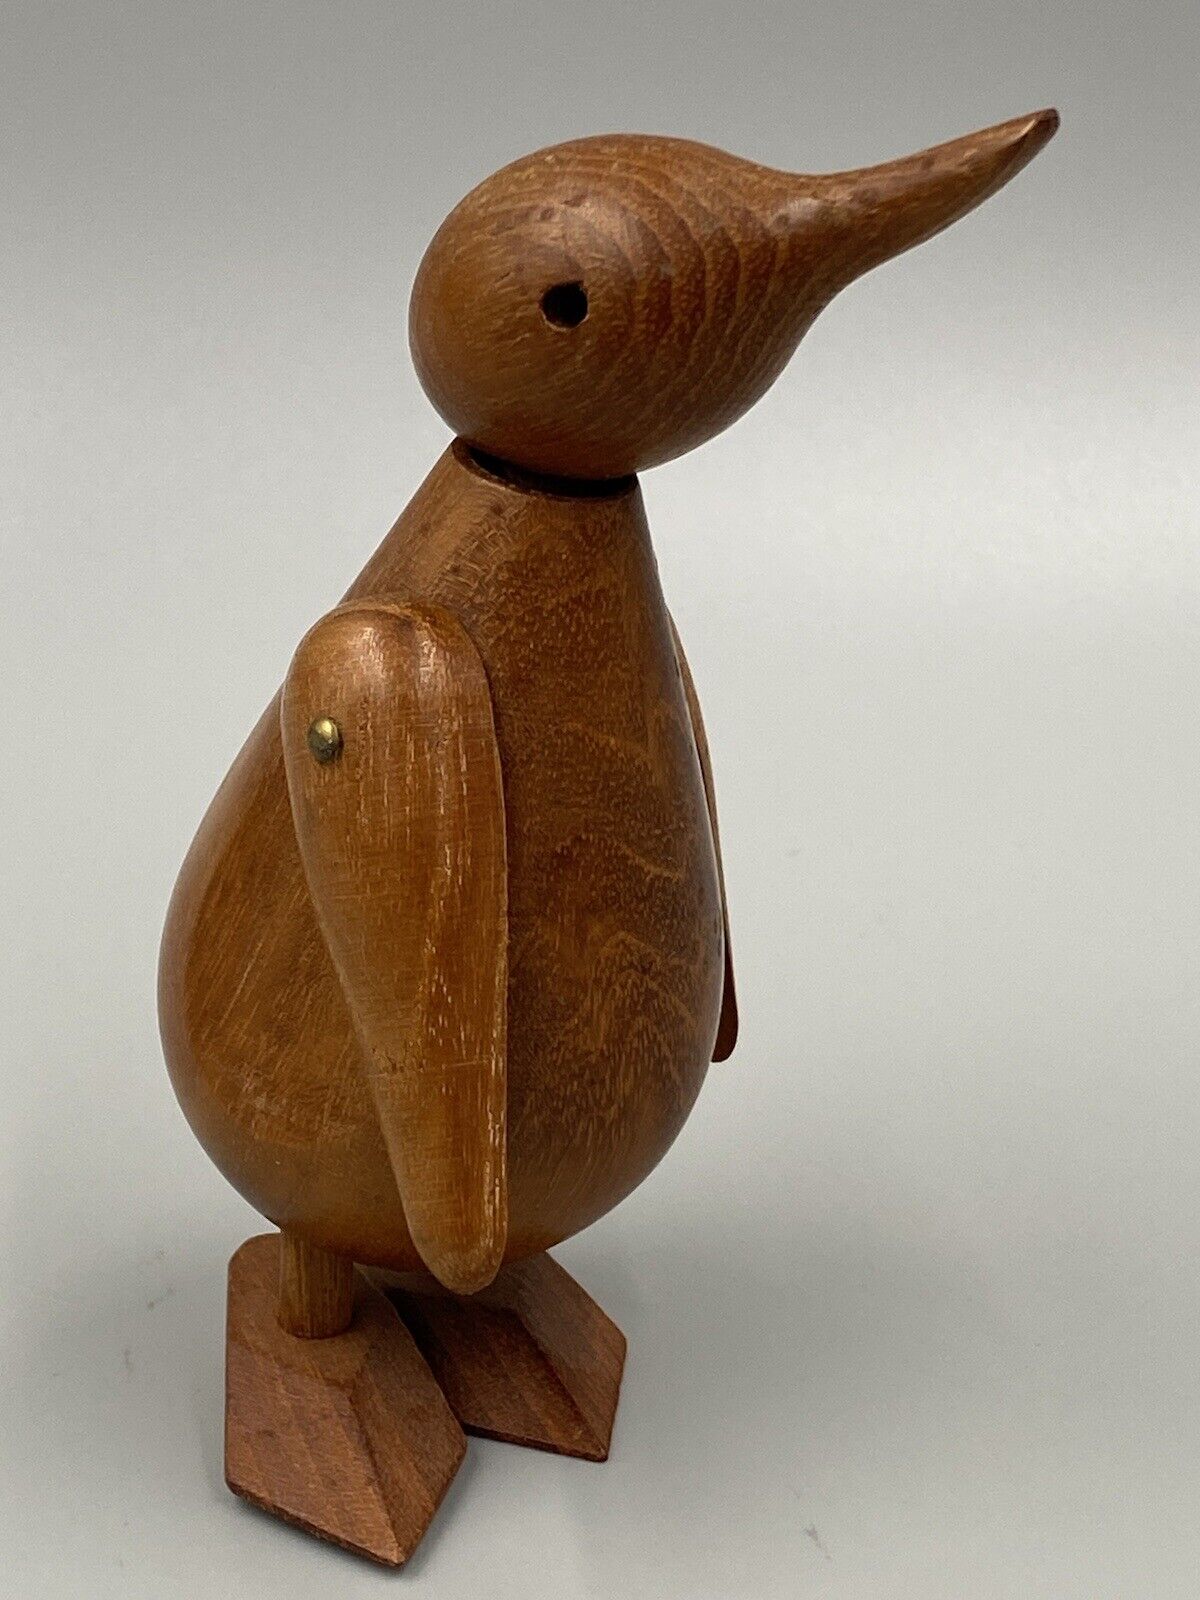 Vintage Teak Penguin Figurine With Moveable Wings 4.5” Made In Hong Kong